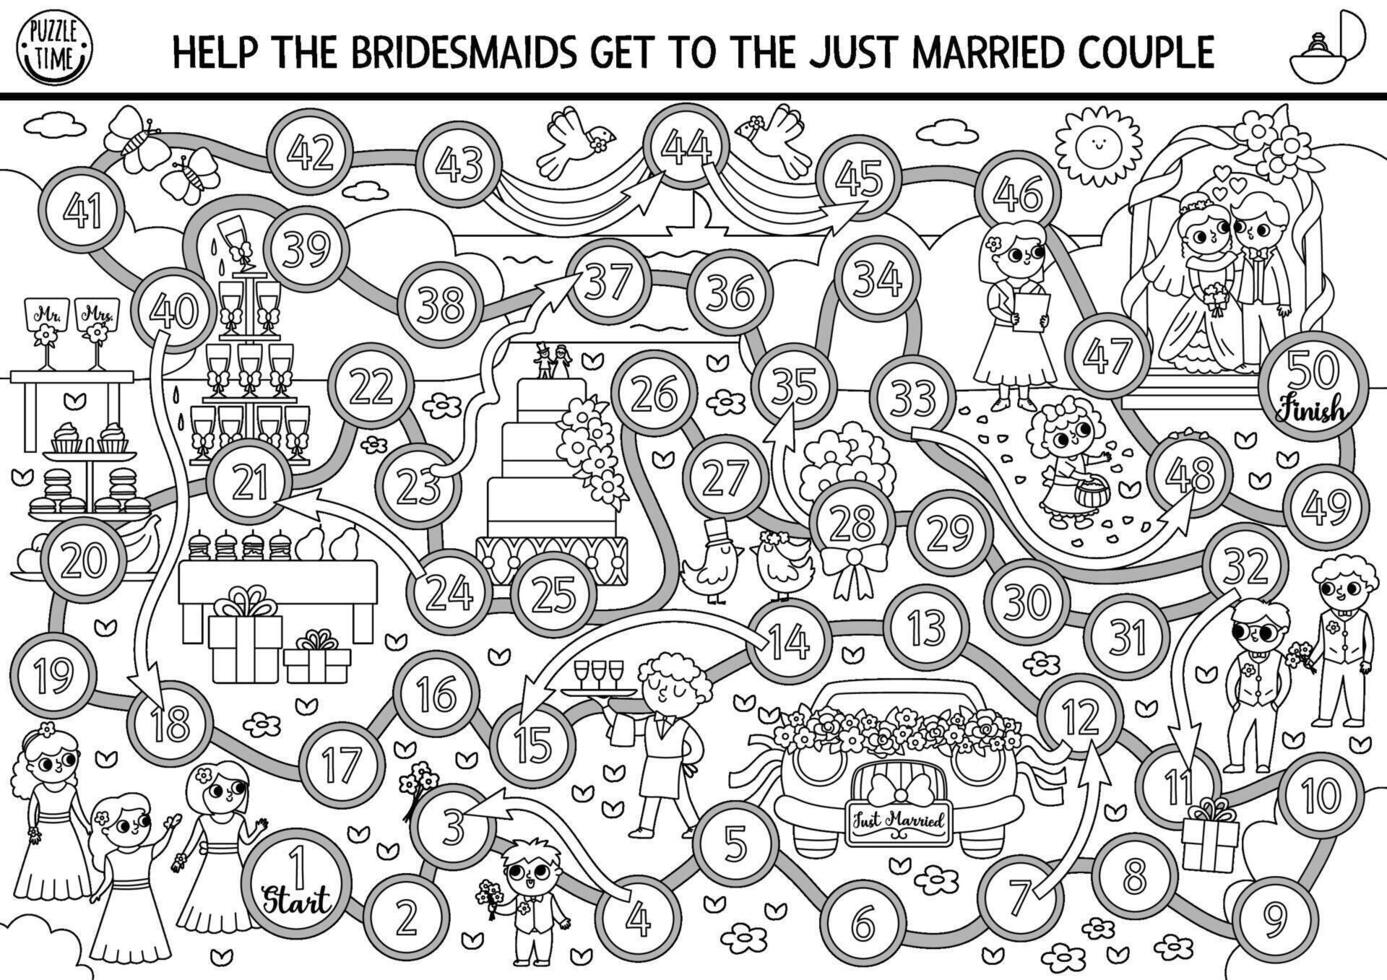 Wedding black and white dice board game for children with cute bride, groom, bridemaids, rings. Marriage ceremony scene boardgame.  Matrimonial printable activity, coloring page vector